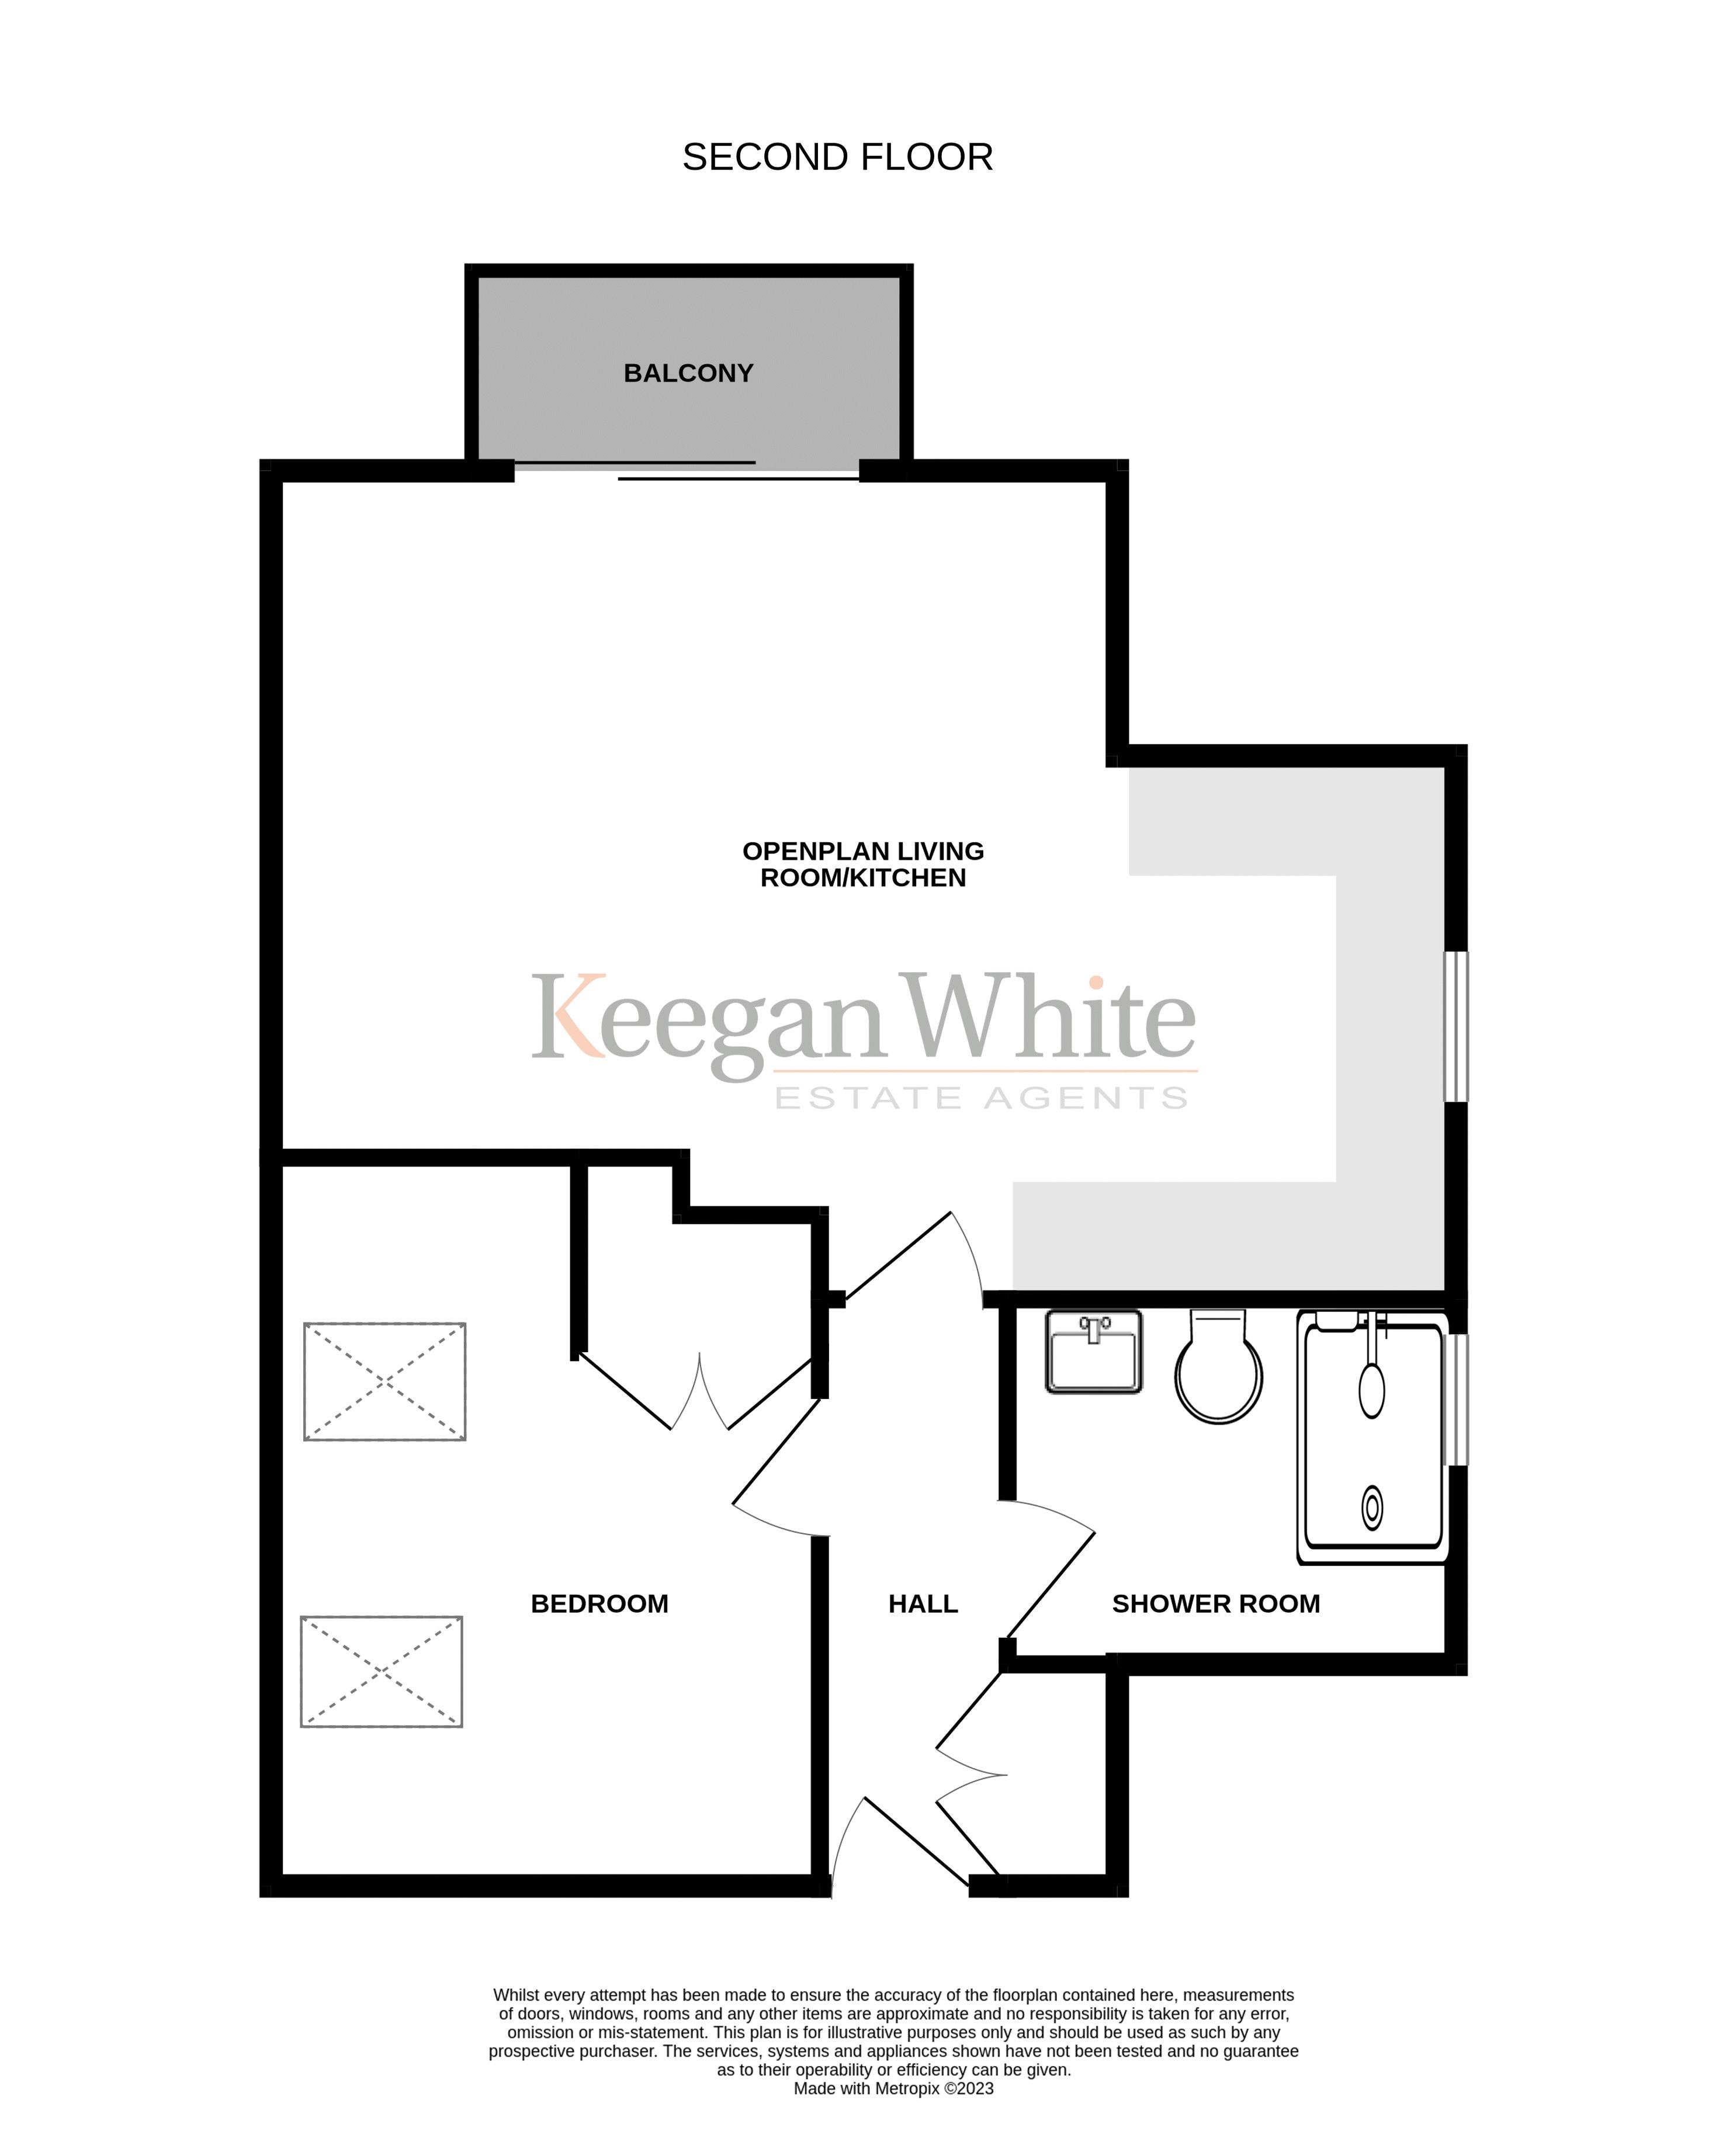 Keegan White Estate Agents in High Wycombe - Floor